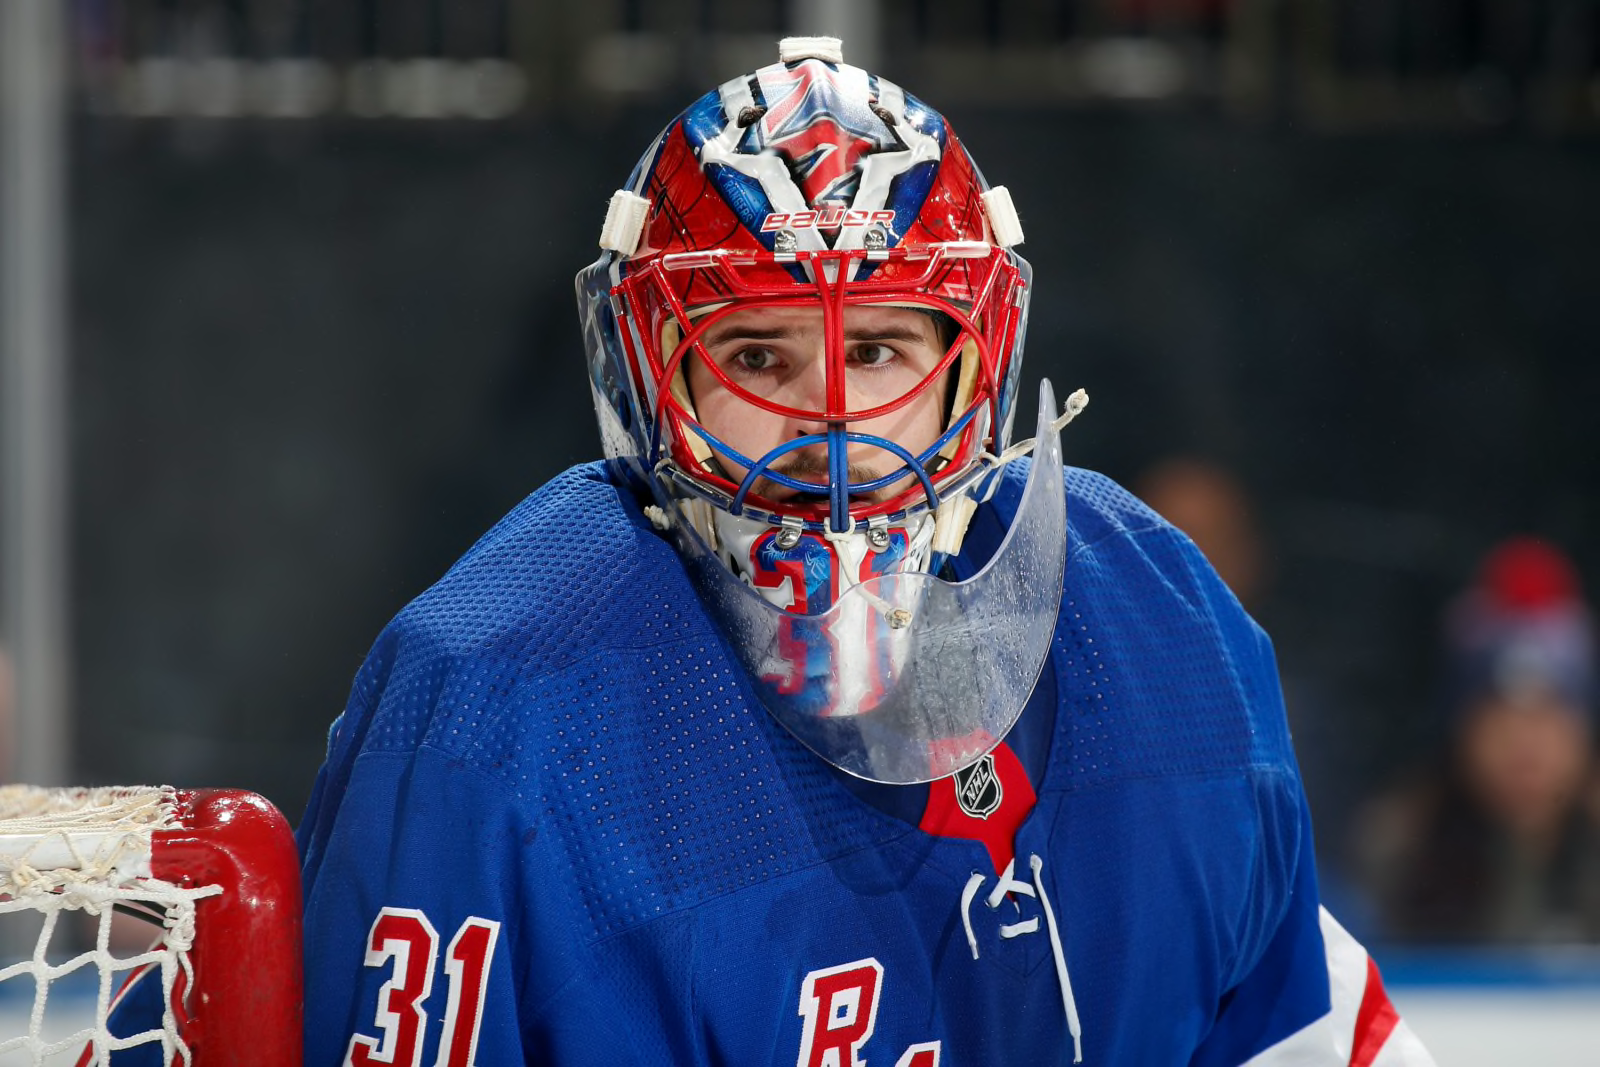 From Moscow to Manhattan: A closer look at New York Rangers' Igor Shesterkin